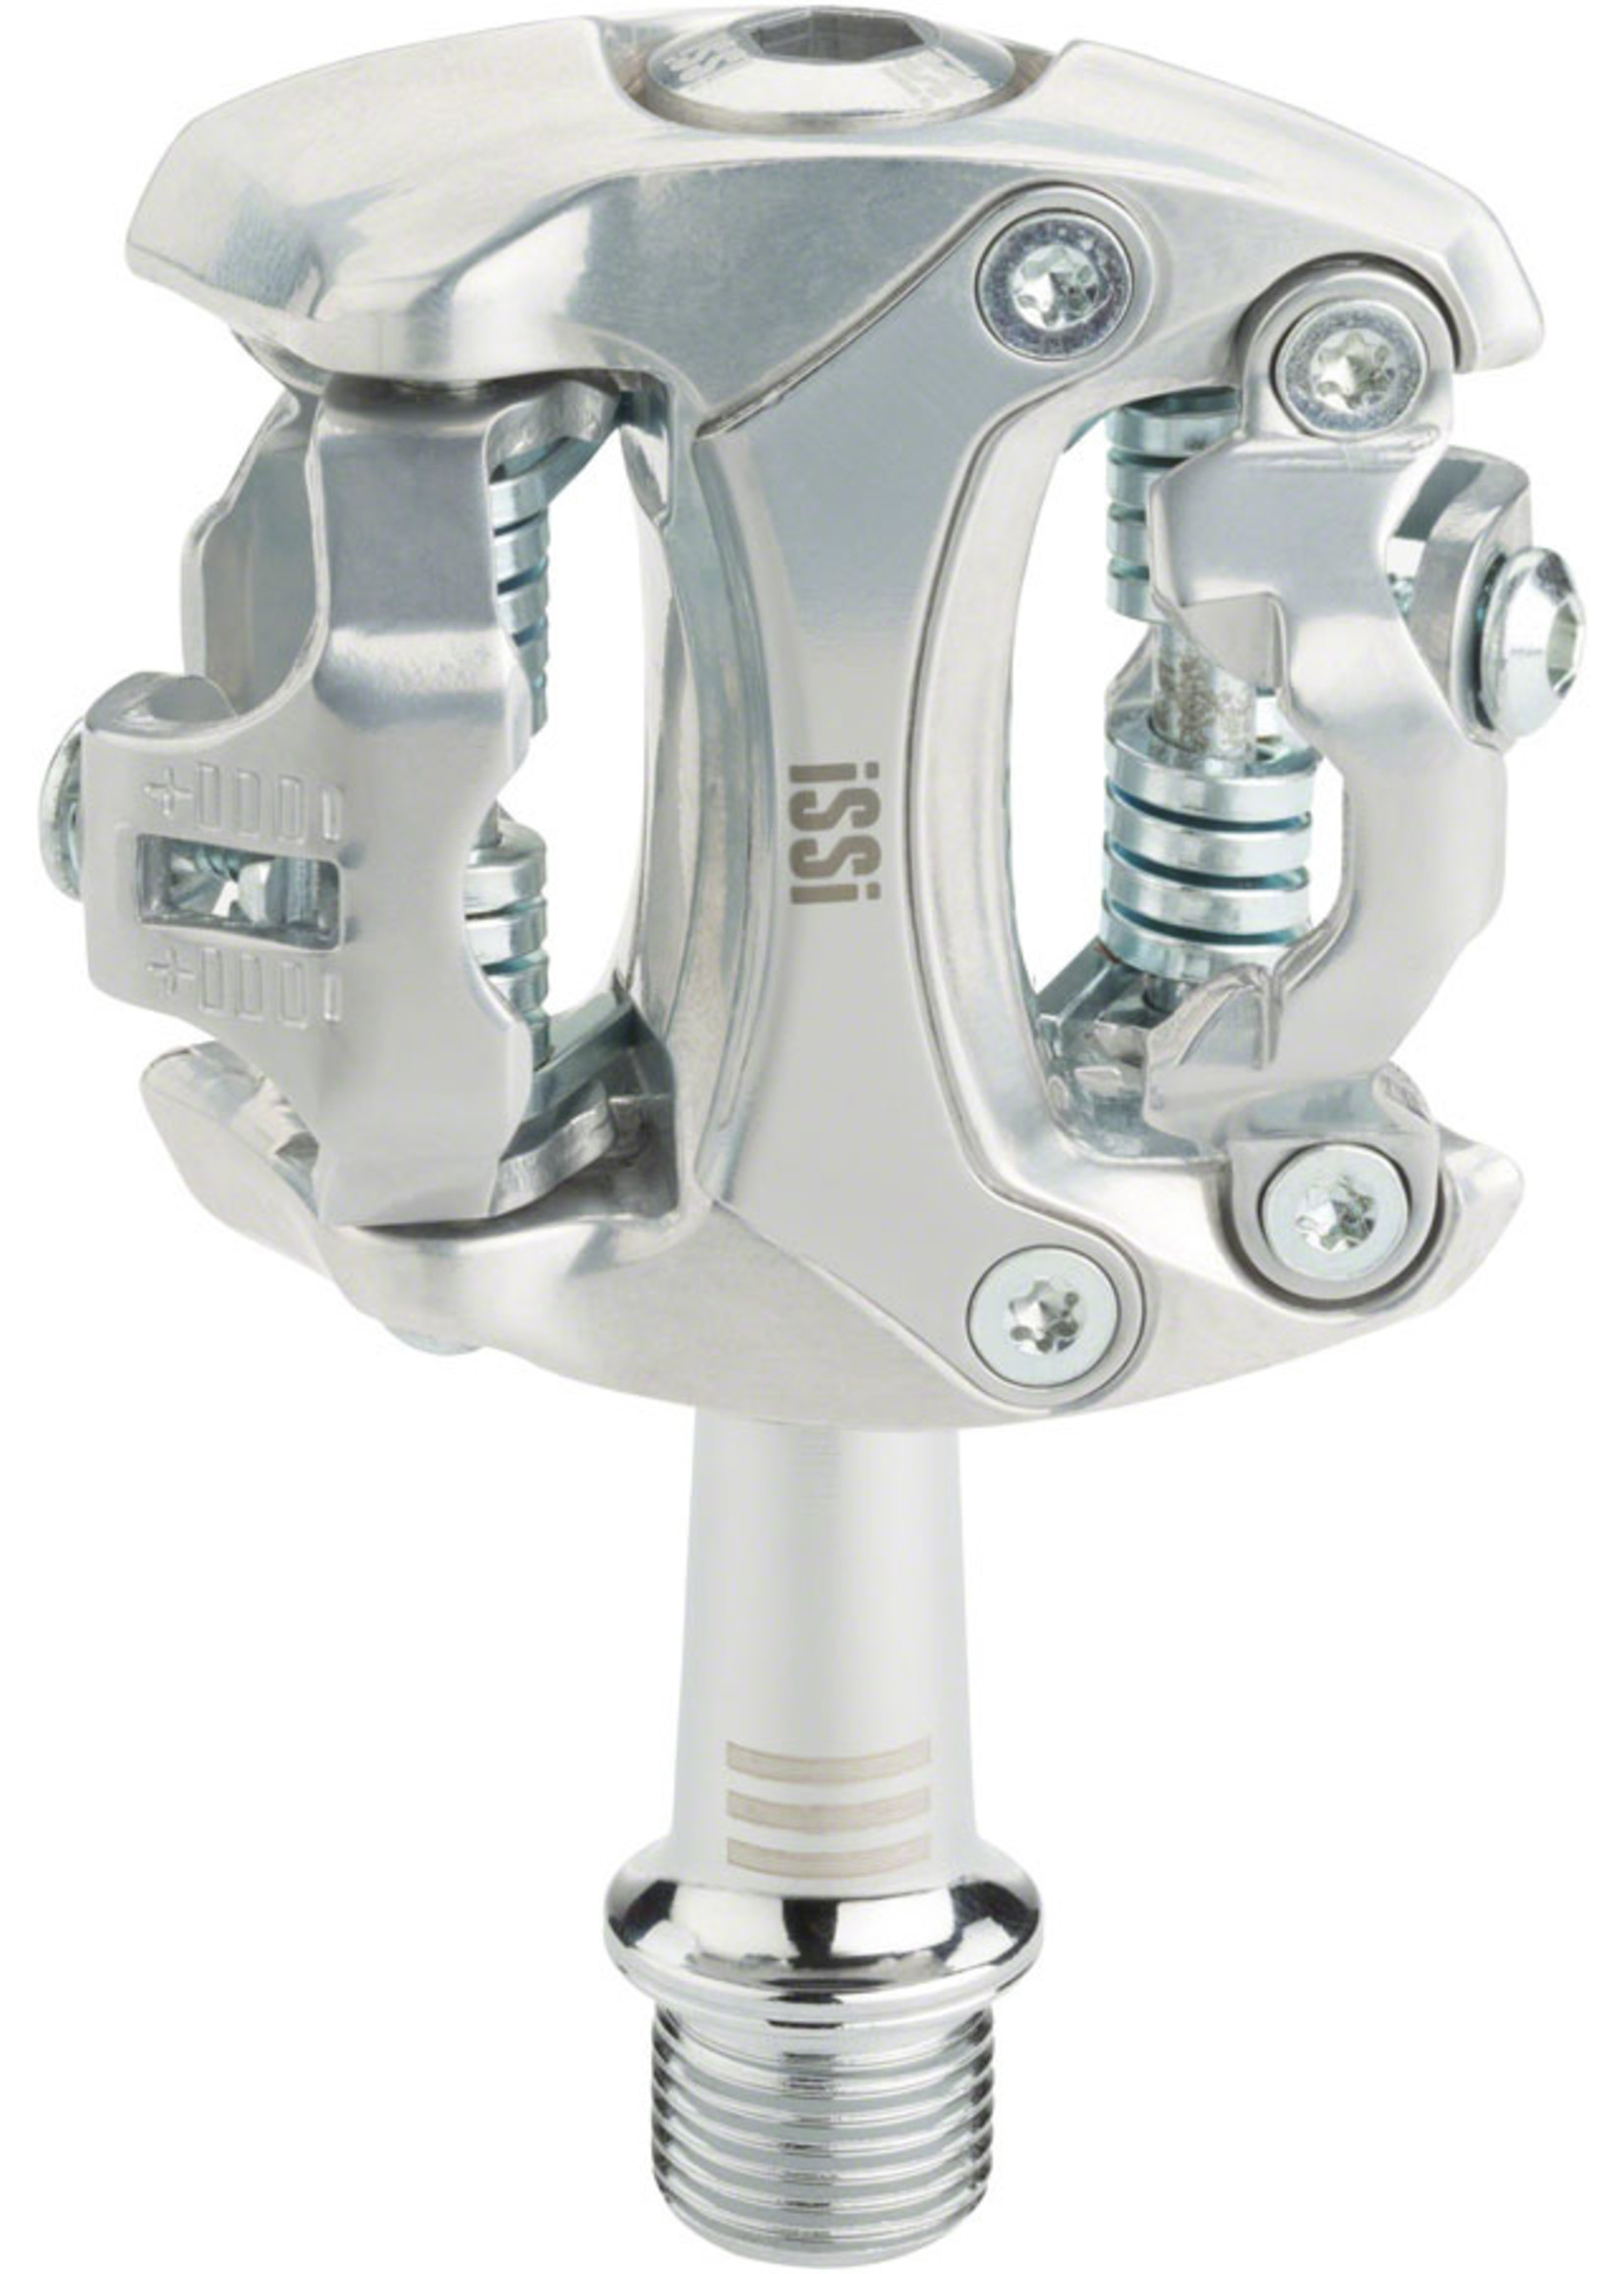 iSSi Flash III Pedals - Dual Sided Clipless, Aluminum, 9/16", Silver